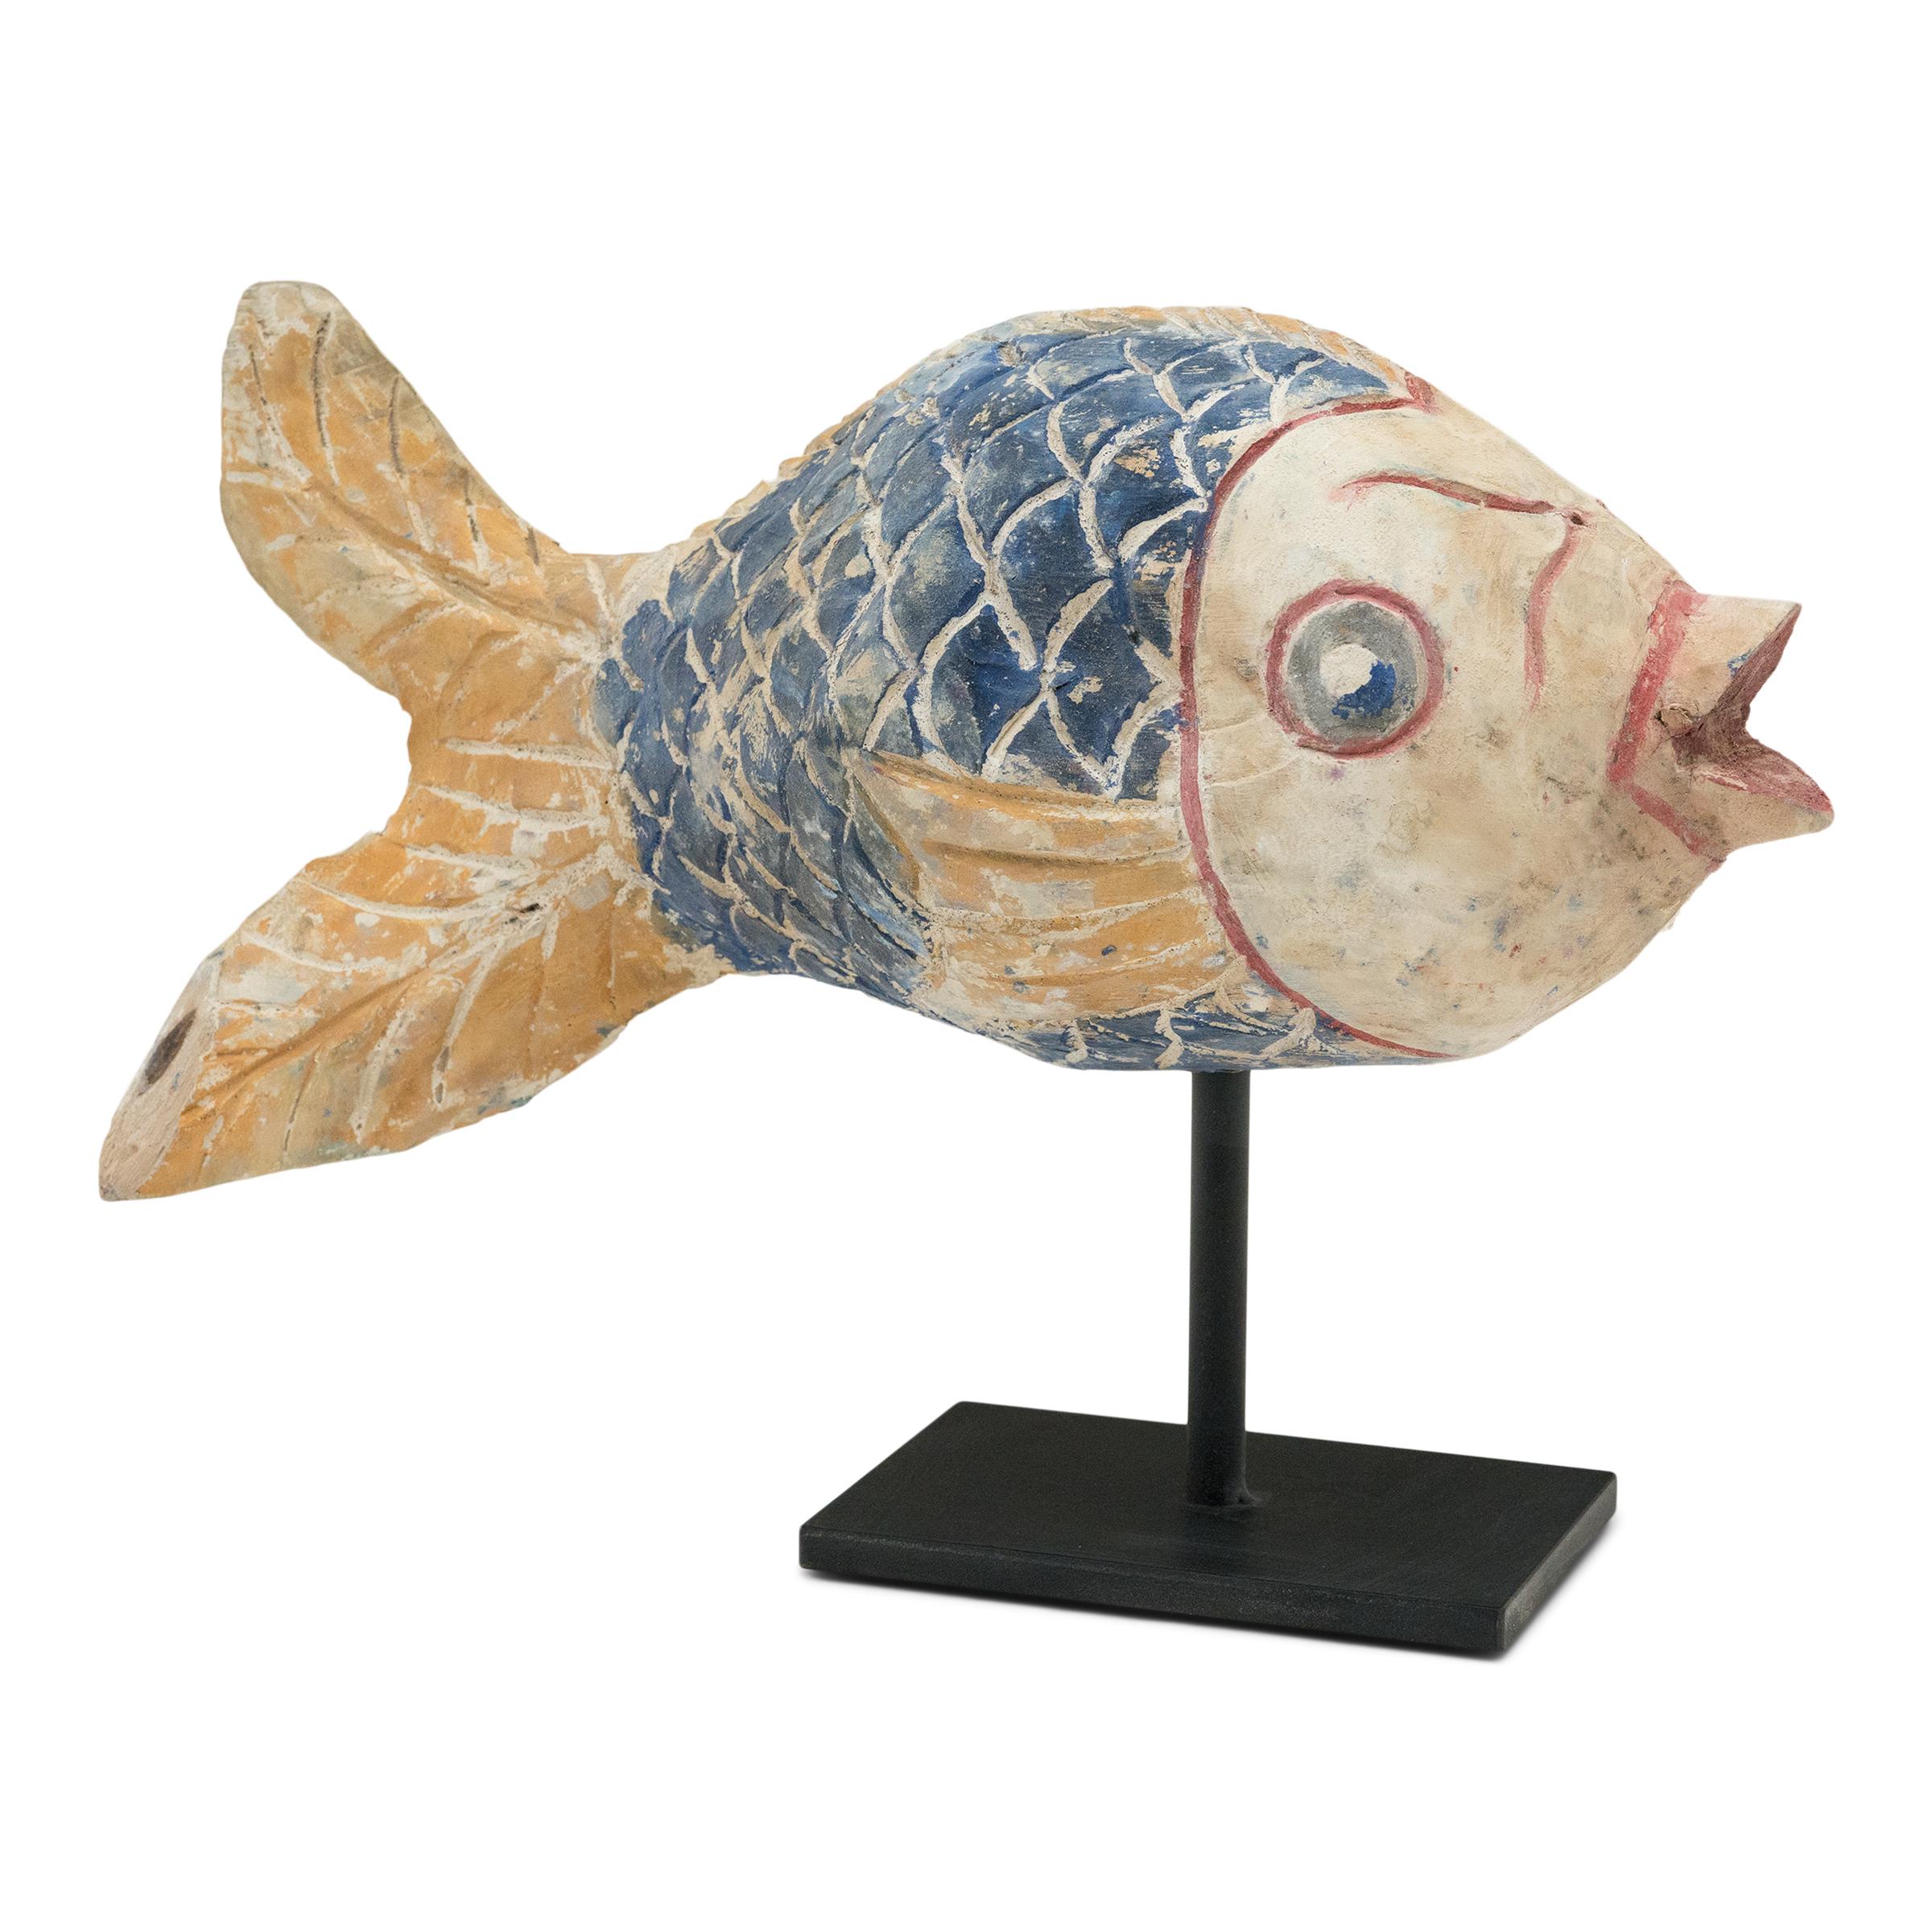 Hand-crafted from reclaimed wood, this large koi sculpture is a traditional symbol of harmony and luck. For Buddhists, such a fish represents a freedom from all restraints. Much of the popularity of fish as a decorative theme hinges on the fact that